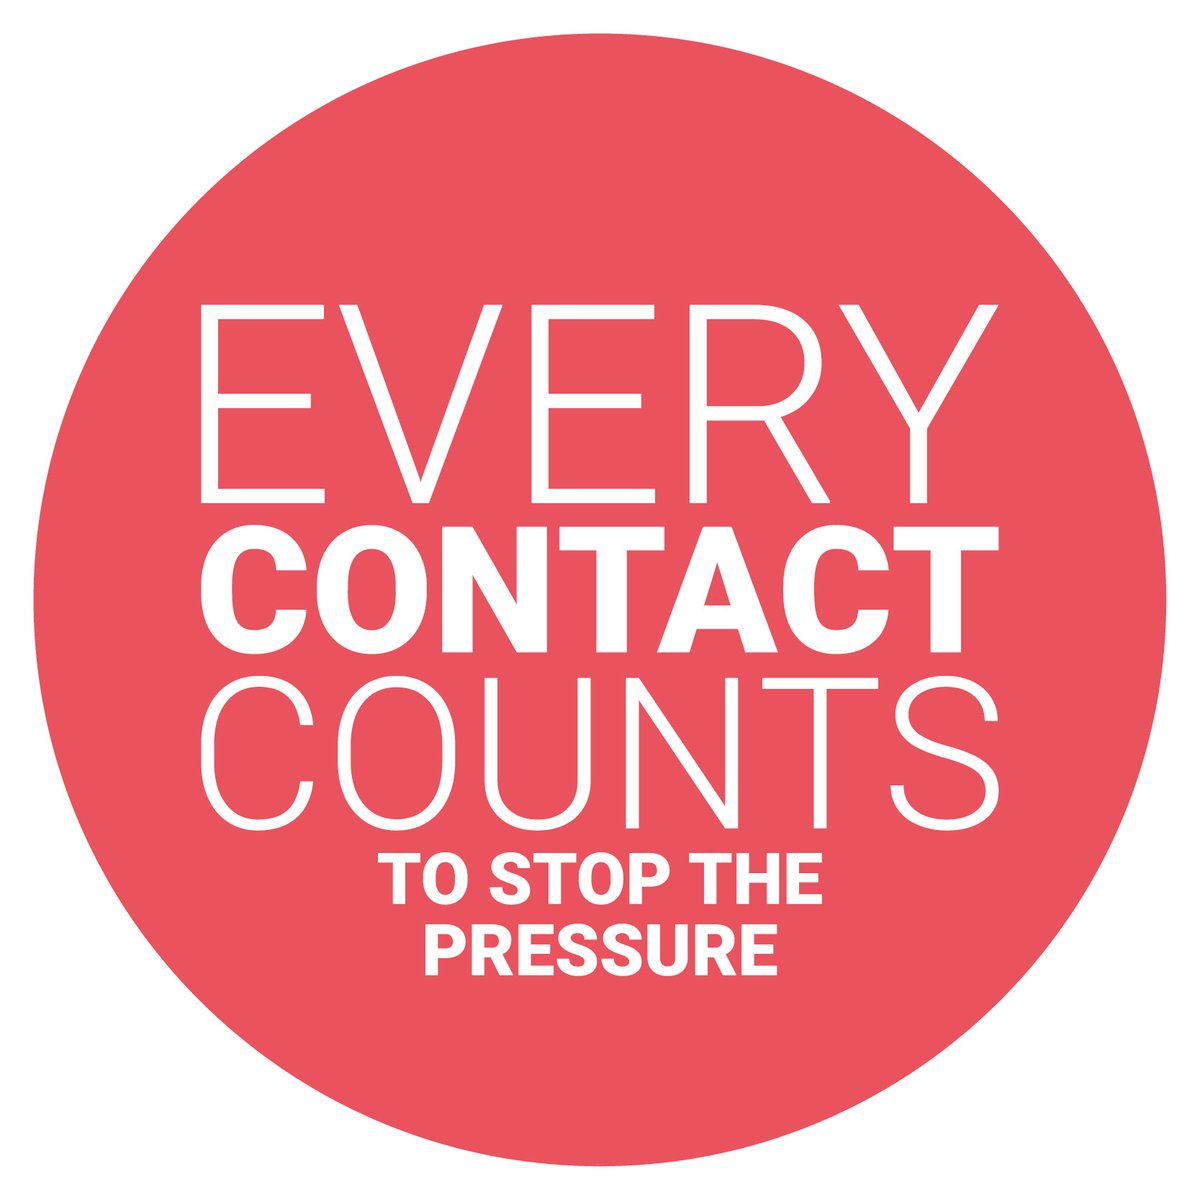 Today marks the beginning of #StopThePressure week! Take a look at the Society of Tissue Viability website to find out how you can get involved: societyoftissueviability.org/community/stop… #EveryContactCounts #PressureUlcers